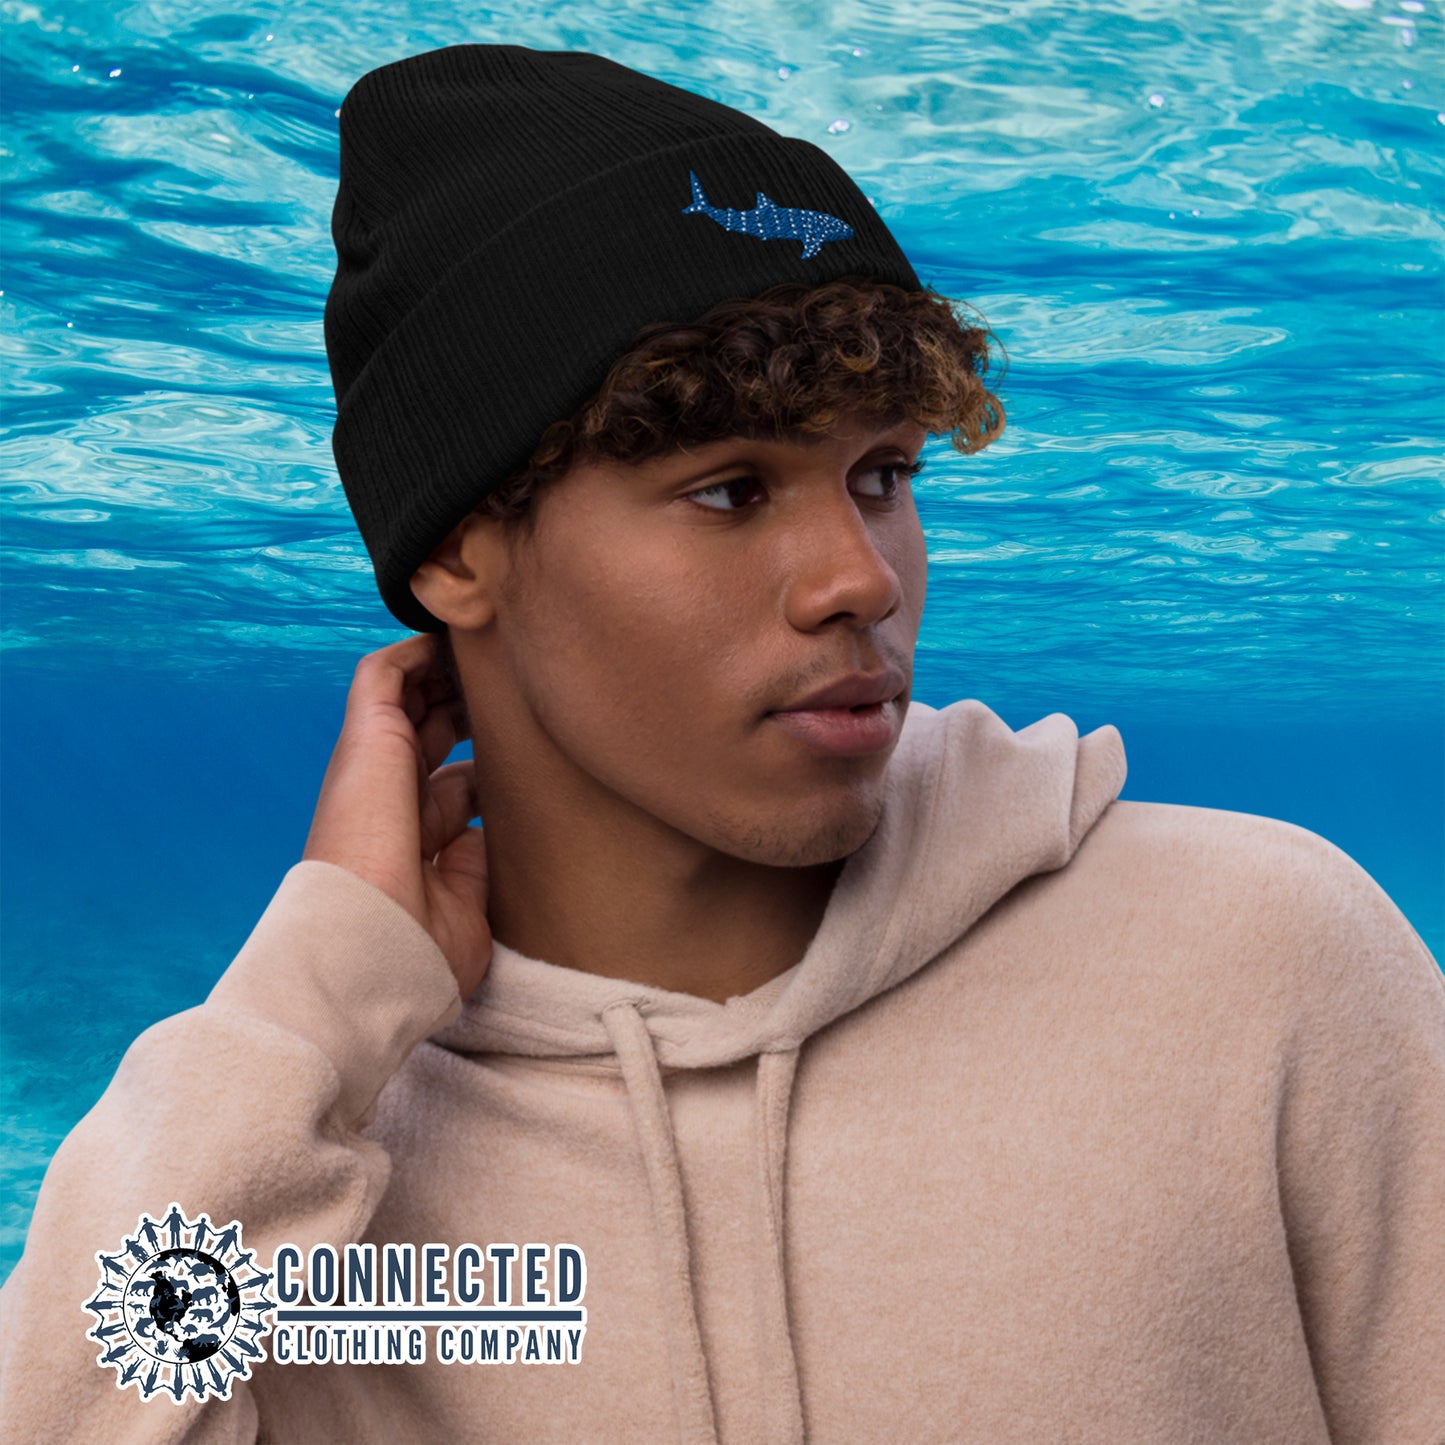 Model Wearing Black Whale Shark Embroidered Recycled Cuffed Beanie - sweetsherriloudesigns - Ethically and Sustainably Made - 10% donated to Mission Blue ocean conservation